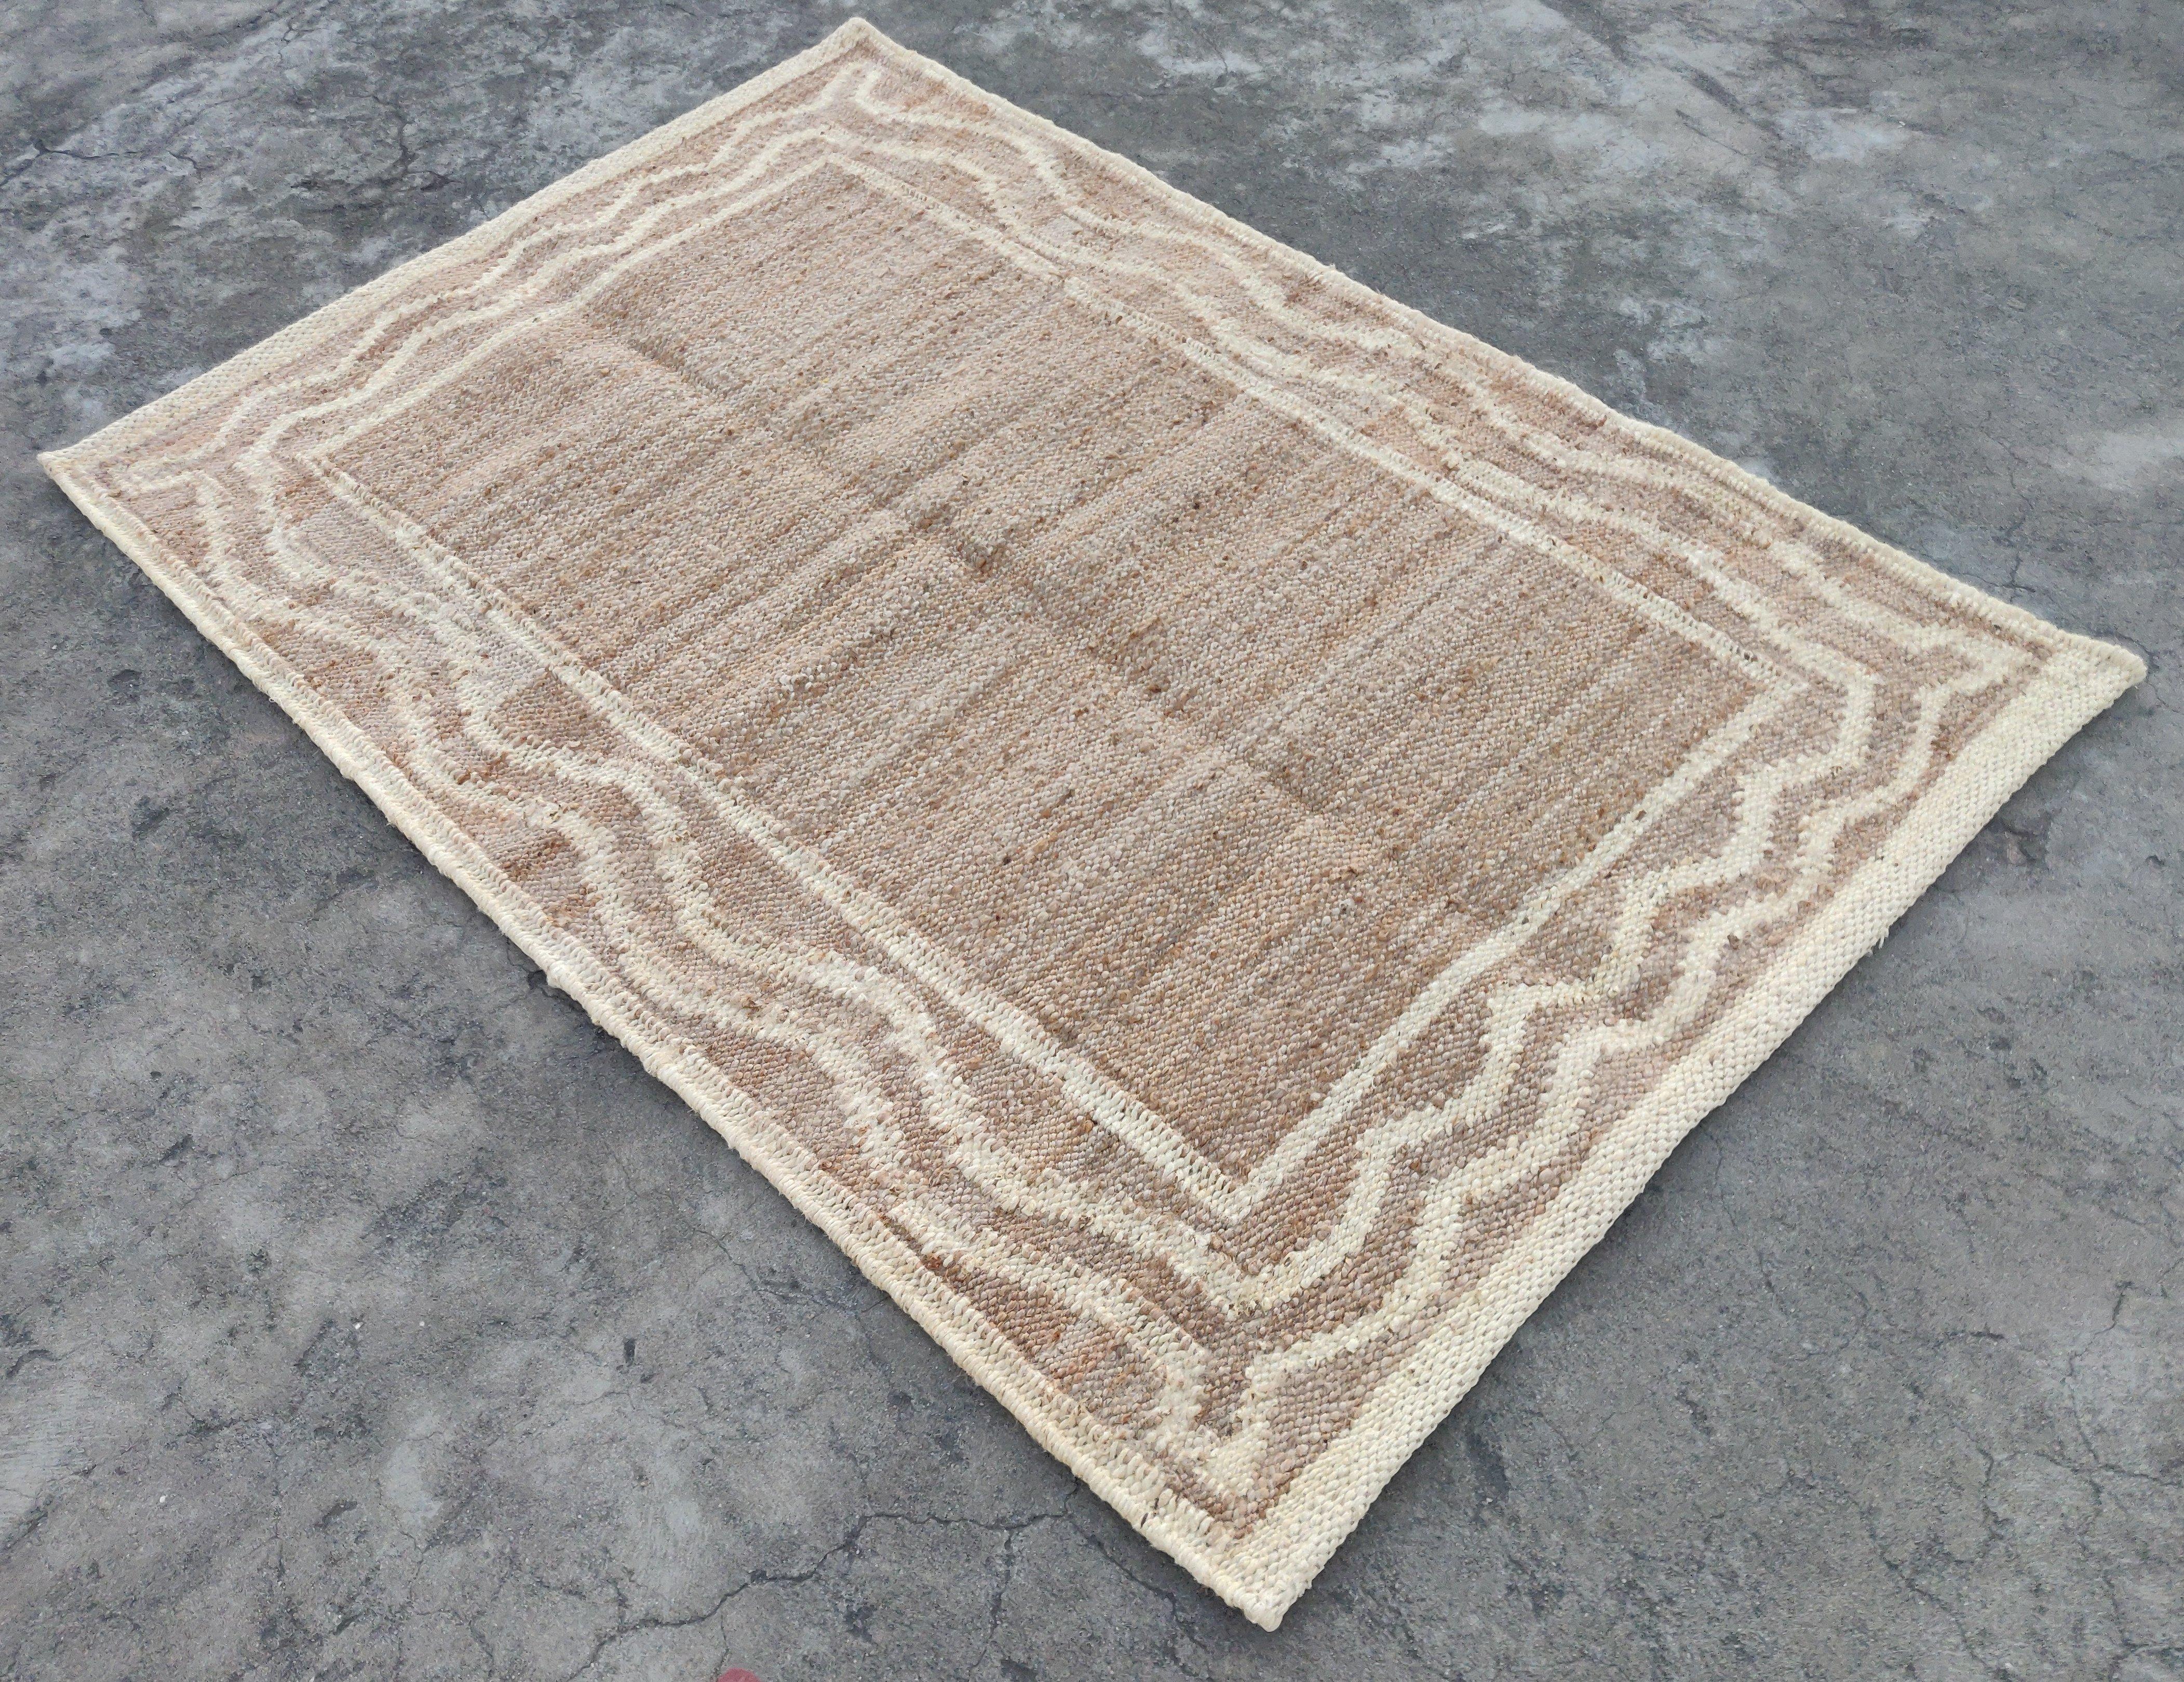 Handmade Jute Bordered Rug, Natural Jute And Antiqued White Bordered Indian Dhurrie -4'x6'

These special flat-weave dhurries are hand-woven with 15 ply 100% cotton yarn. Due to the special manufacturing techniques used to create our rugs, the size